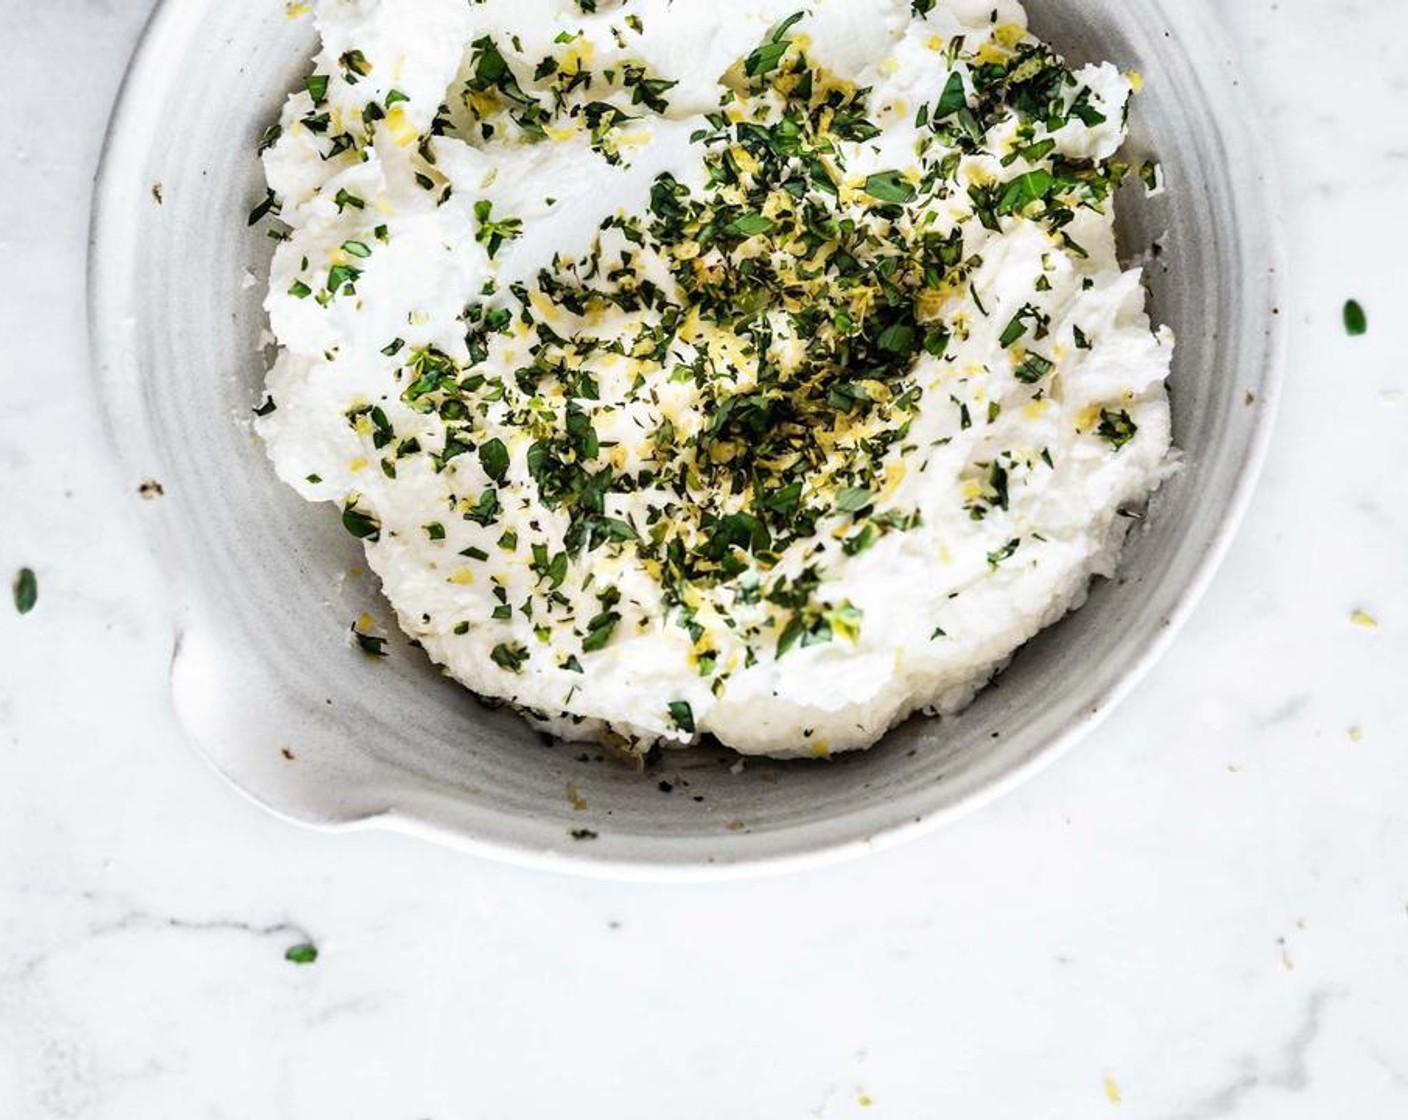 step 3 In a small bowl, combine the Labneh Cheese (2 cups) with the Salt, Fresh Basil (2 Tbsp), Fresh Mint (1 Tbsp), Fresh Thyme Leaves (1 tsp) and Lemon Zest, reserving a bit of the zest for garnish. Mix until well combined, set aside.